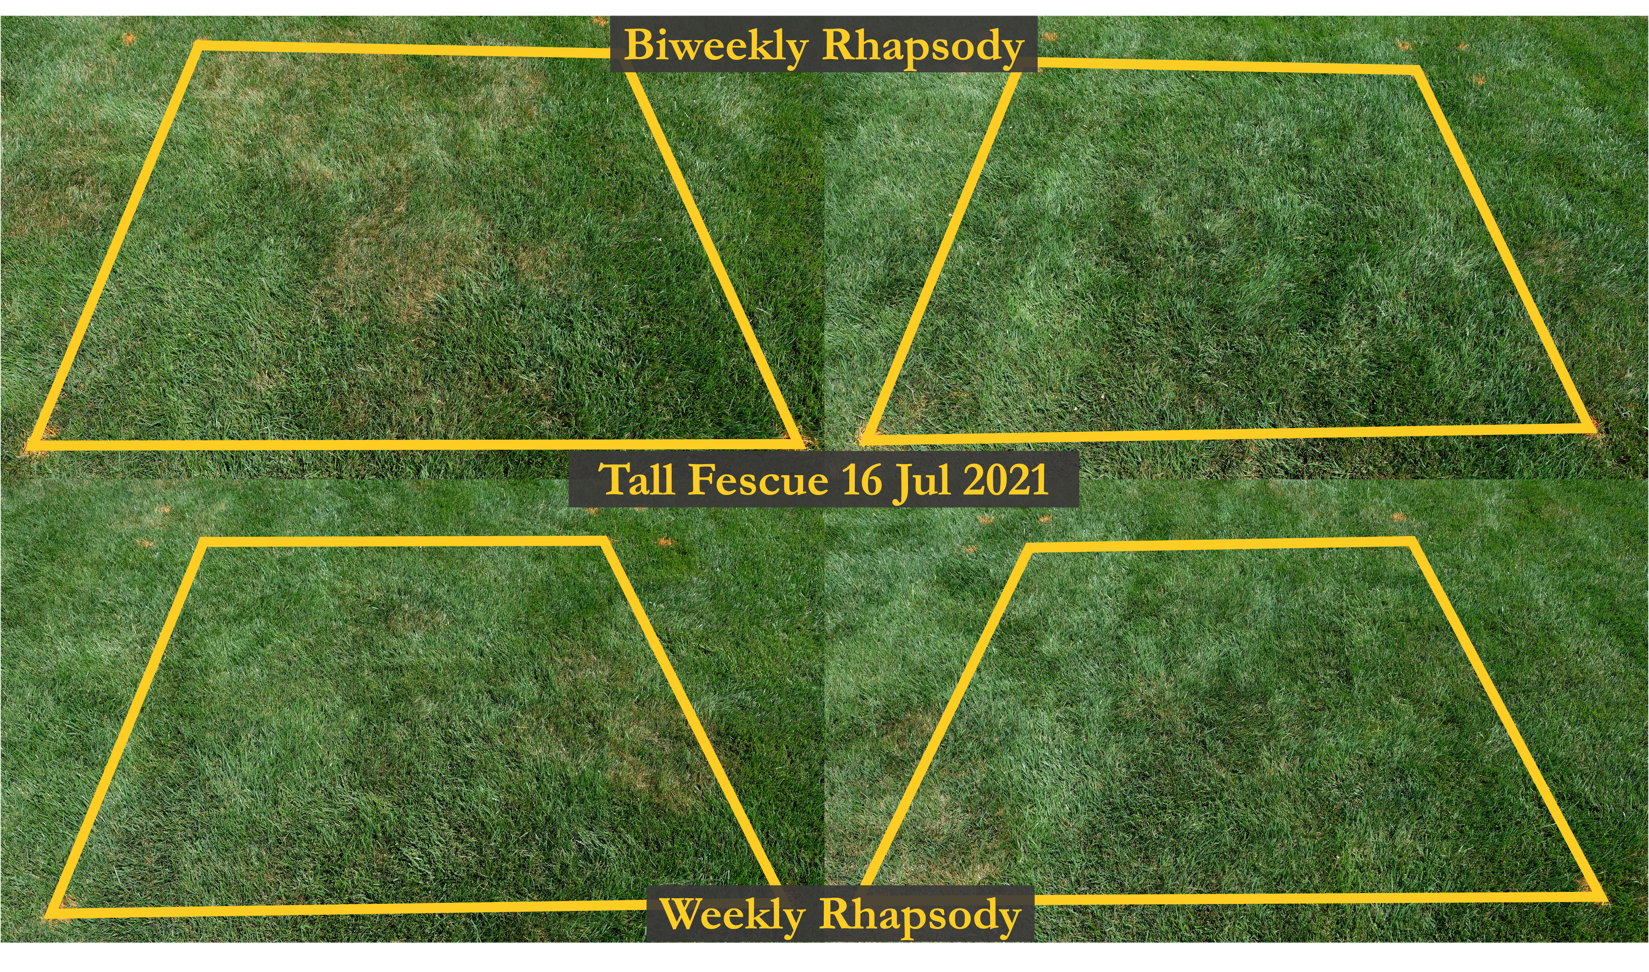 Variation in the efficacy of biological control organisms in a field trial evaluating the efficacy of biological control organisms against brown patch in a tall fescue home lawn at the peak of disease severity. Images are of high disease severity (left), low disease severity (right), biweekly biological control organism applications (top), and weekly biological control organism applications (bottom). All images were taken on 16 July 2021.